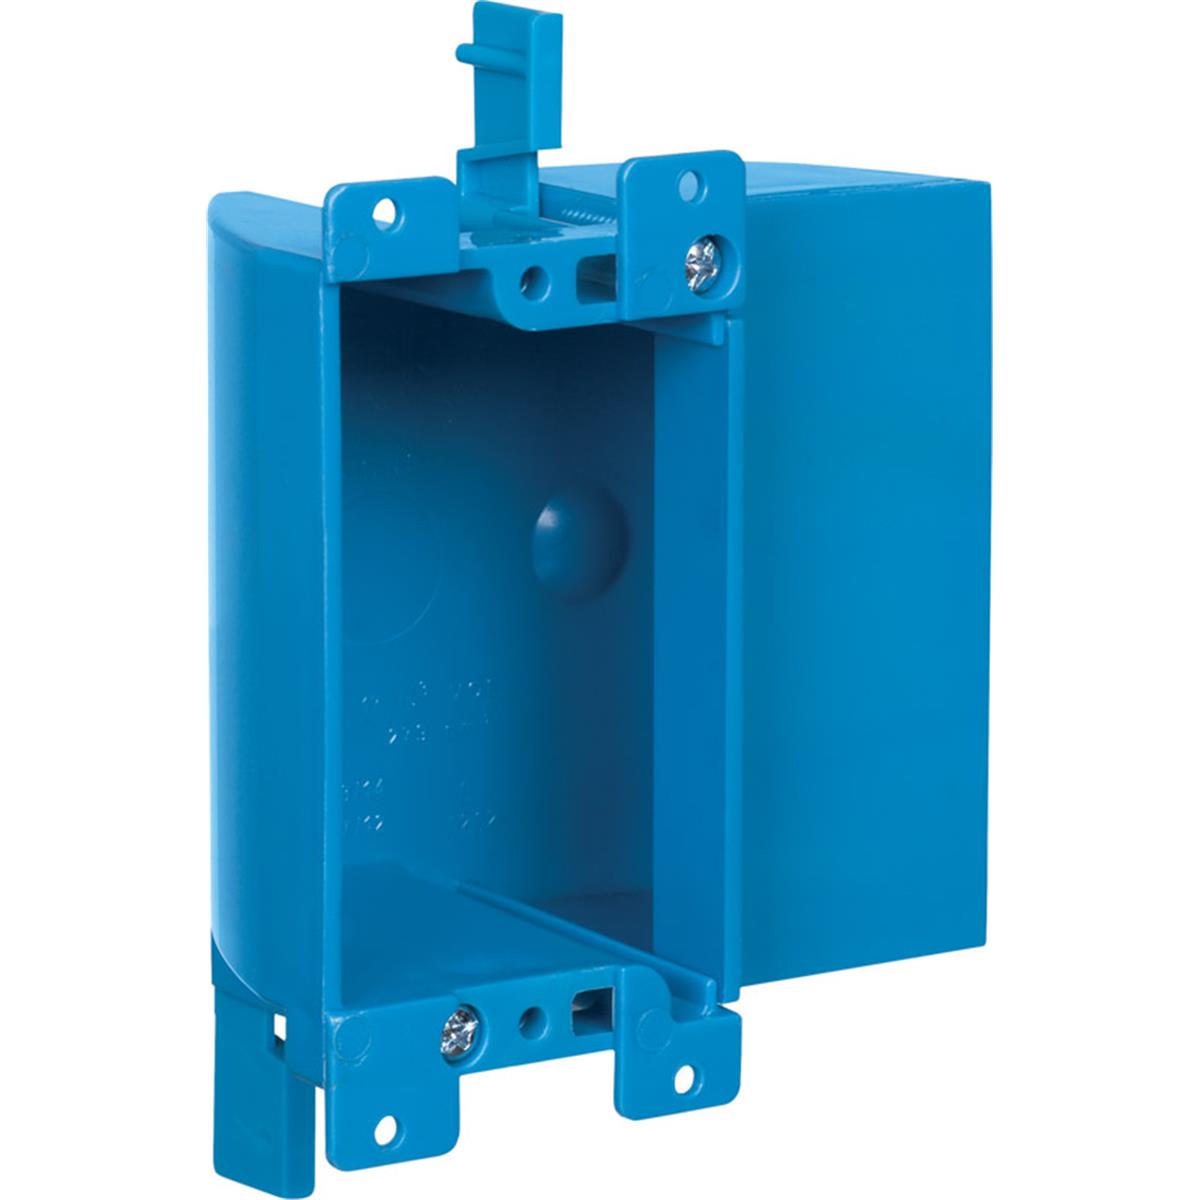 Thomas & Betts B117rsw Old Work Outlet Box Shallow Walls